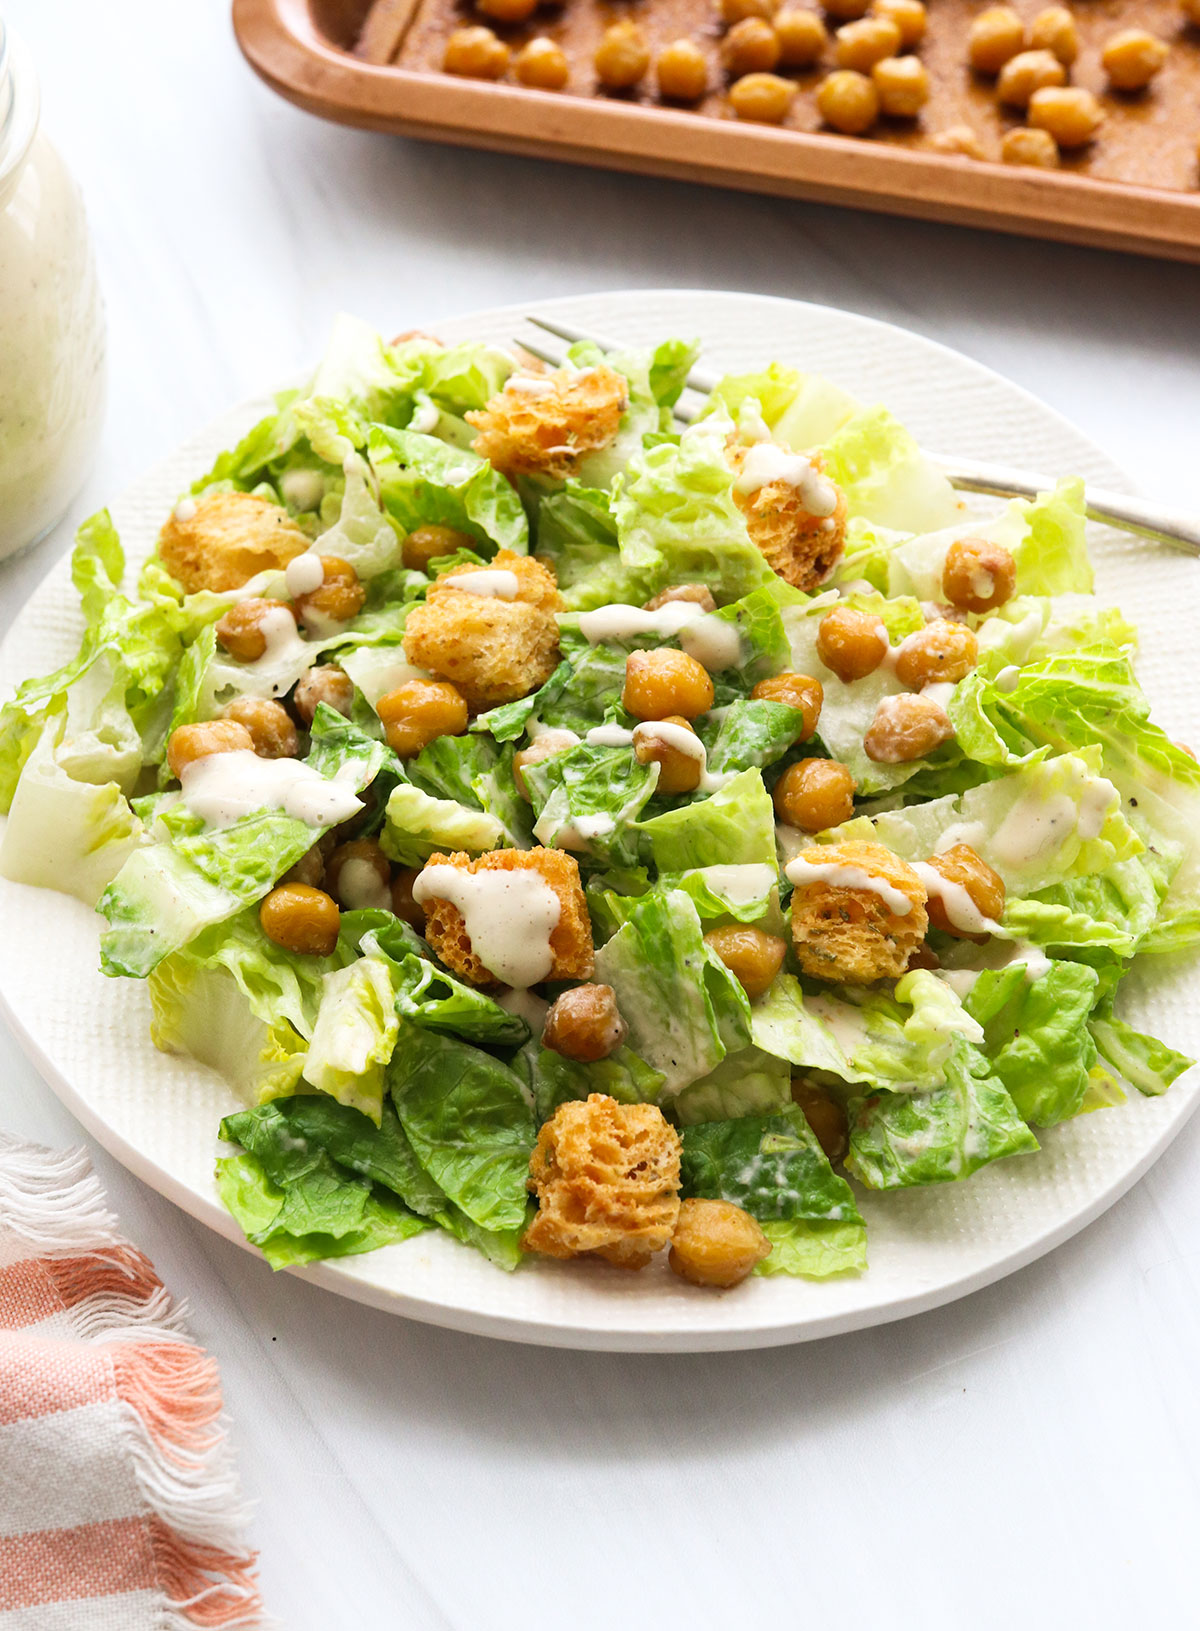 dressing and toppings added to caesar salad.